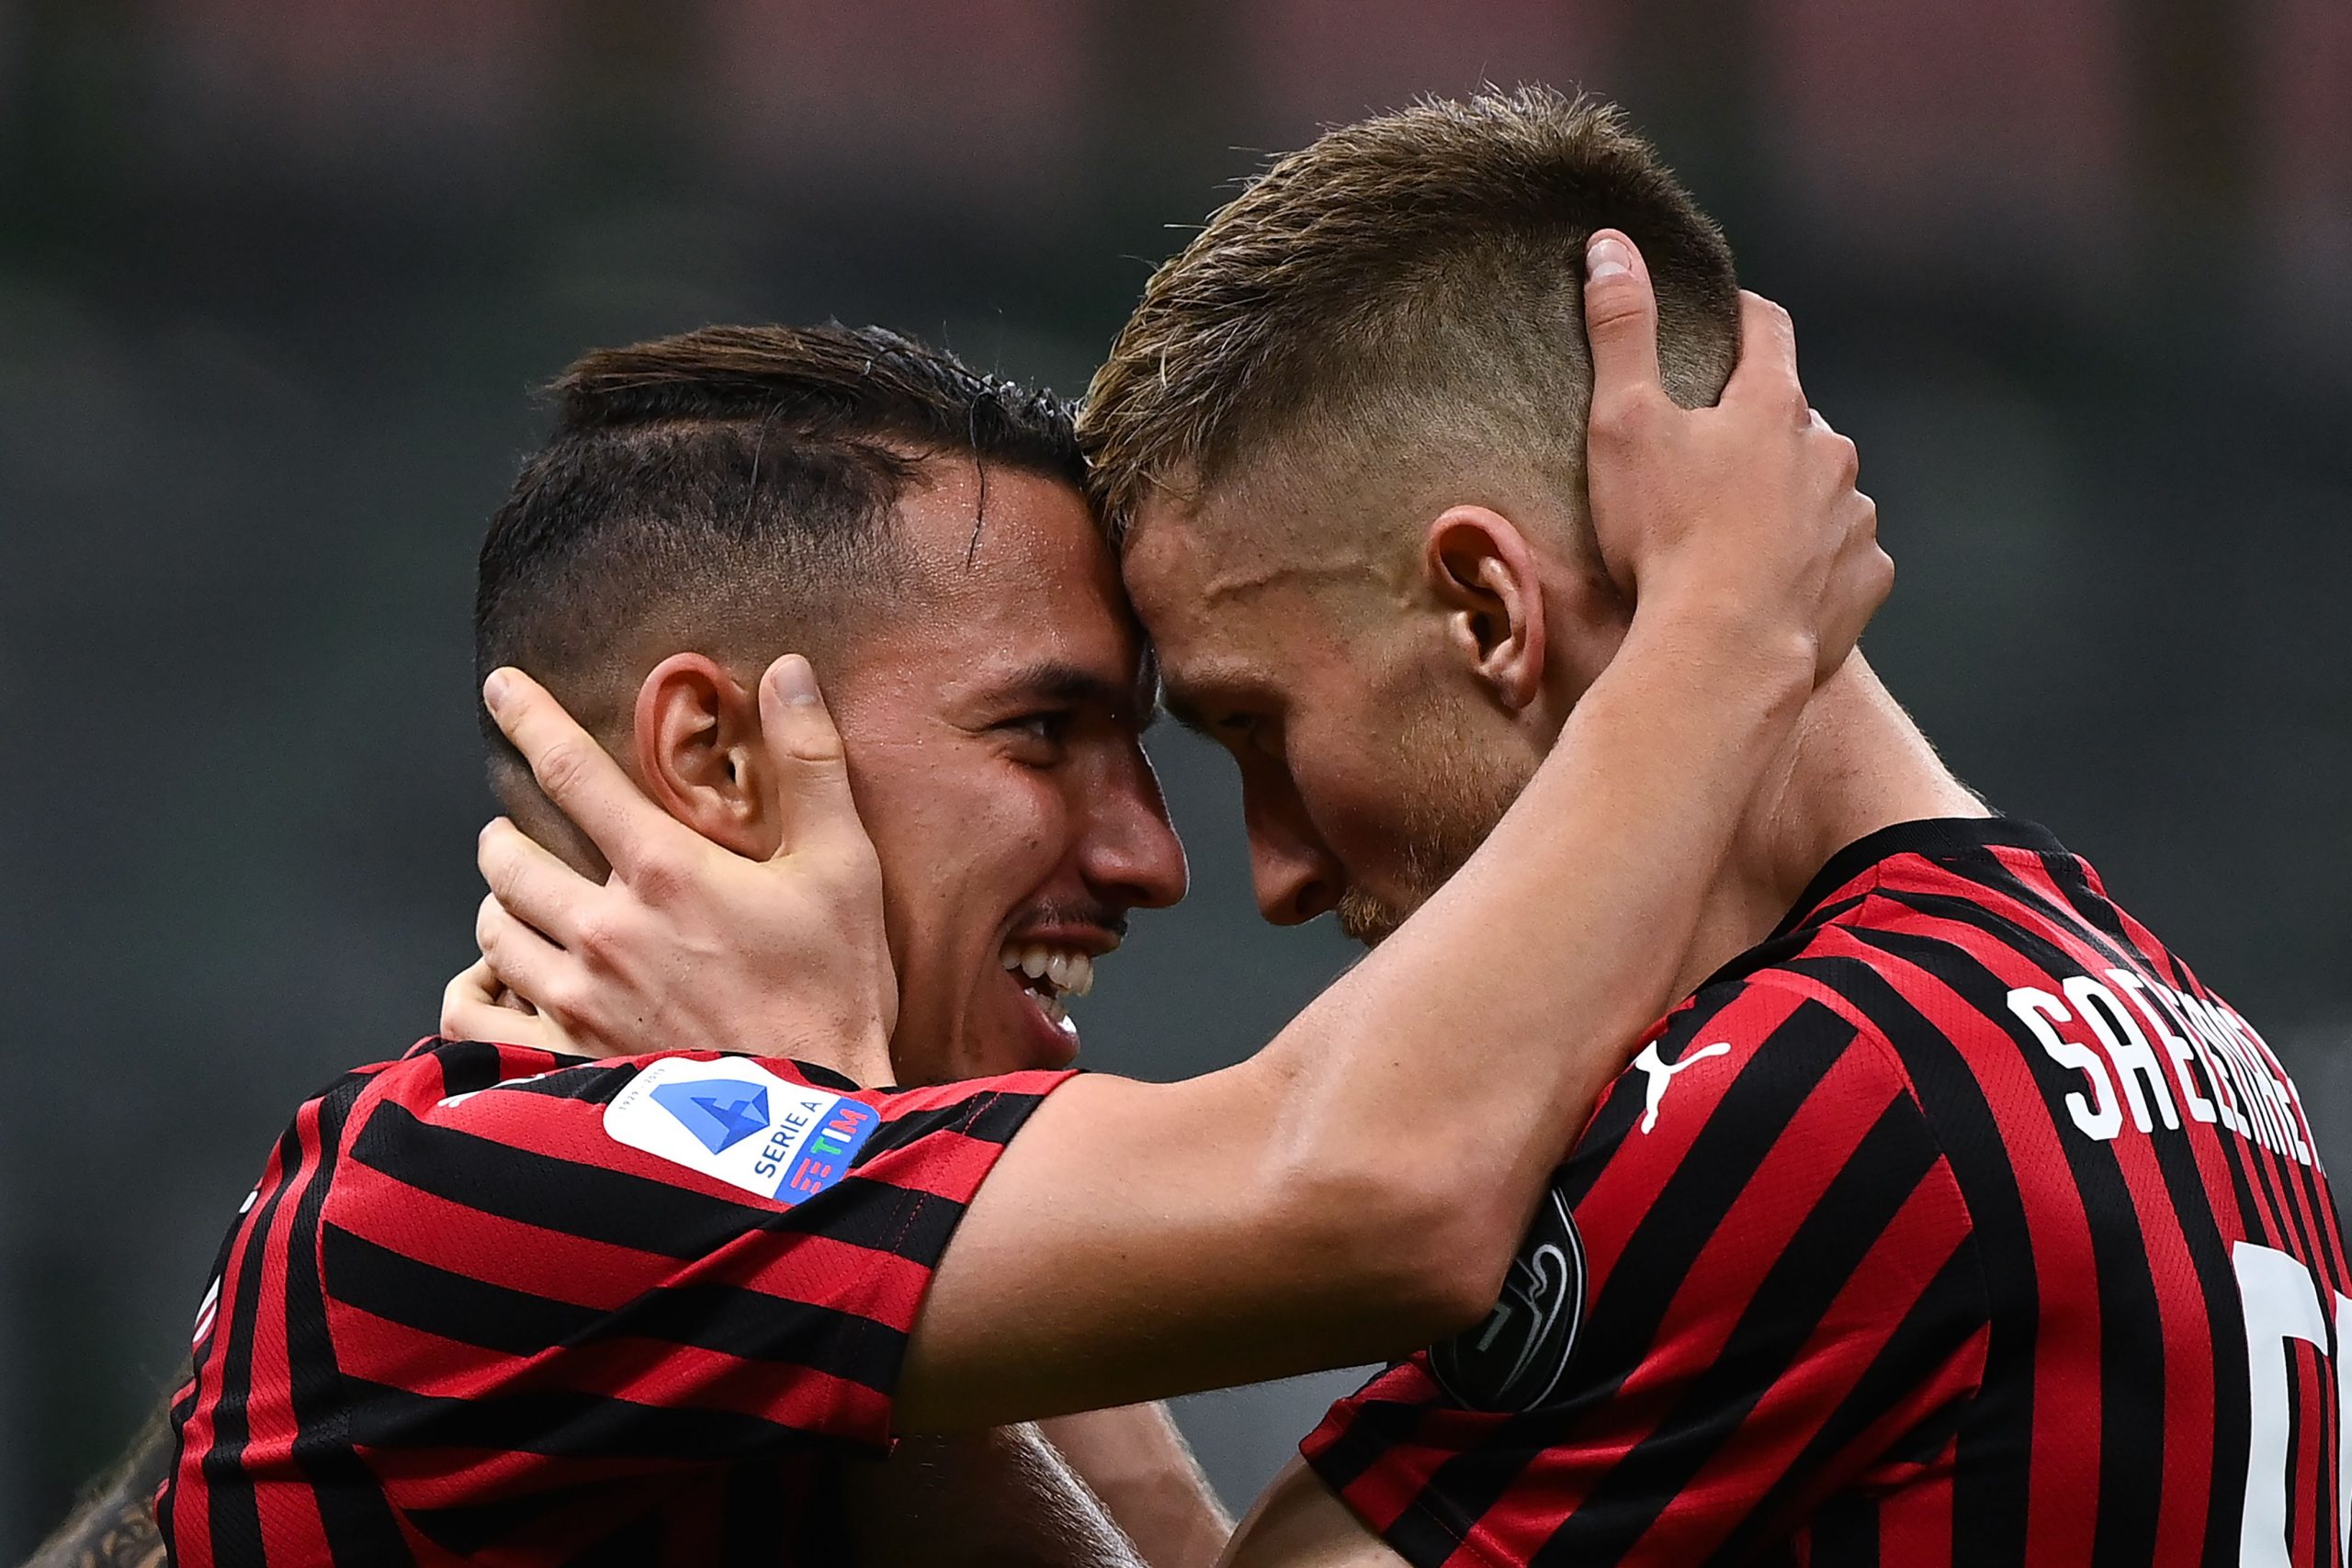 AC Milan's Algerian midfielder Ismael Bennacer (L) celebrates with AC Milan's Belgian midfielder Alexis Saelemaeker after scoring a goal during the Italian Serie A football match AC Milan vs Bologna played behind closed doors on July 15, 2020 at the San Siro Stadium in Milan, as the country eases its lockdown aimed at curbing the spread of the COVID-19 infection, caused by the novel coronavirus. (Photo by MARCO BERTORELLO / AFP) 